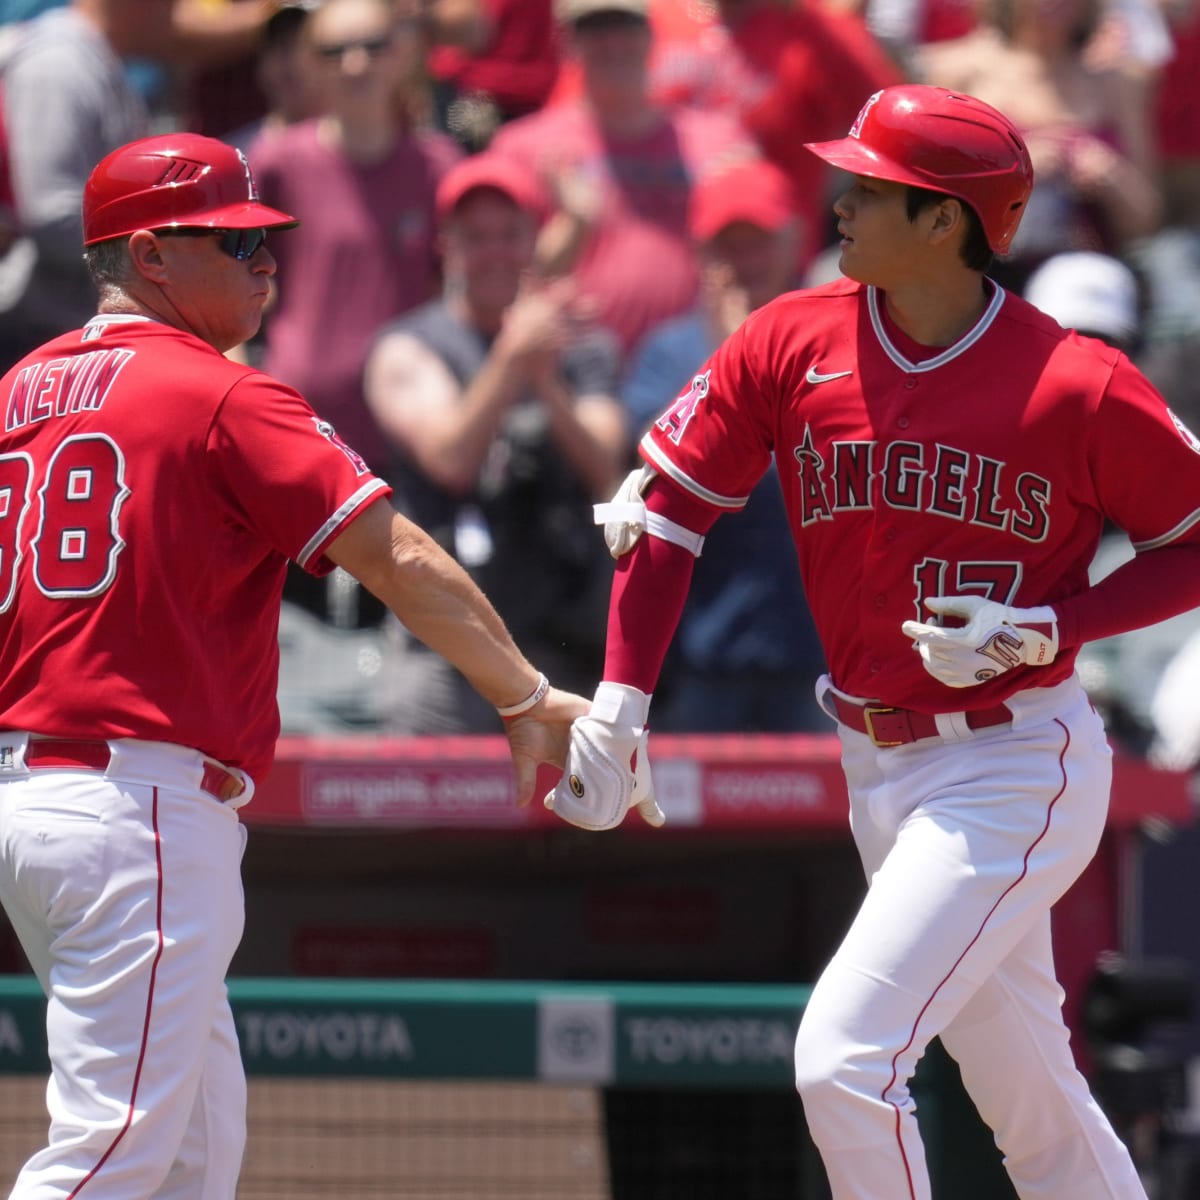 Los Angeles Angels All-Star Shohei Ohtani hits it out of the park